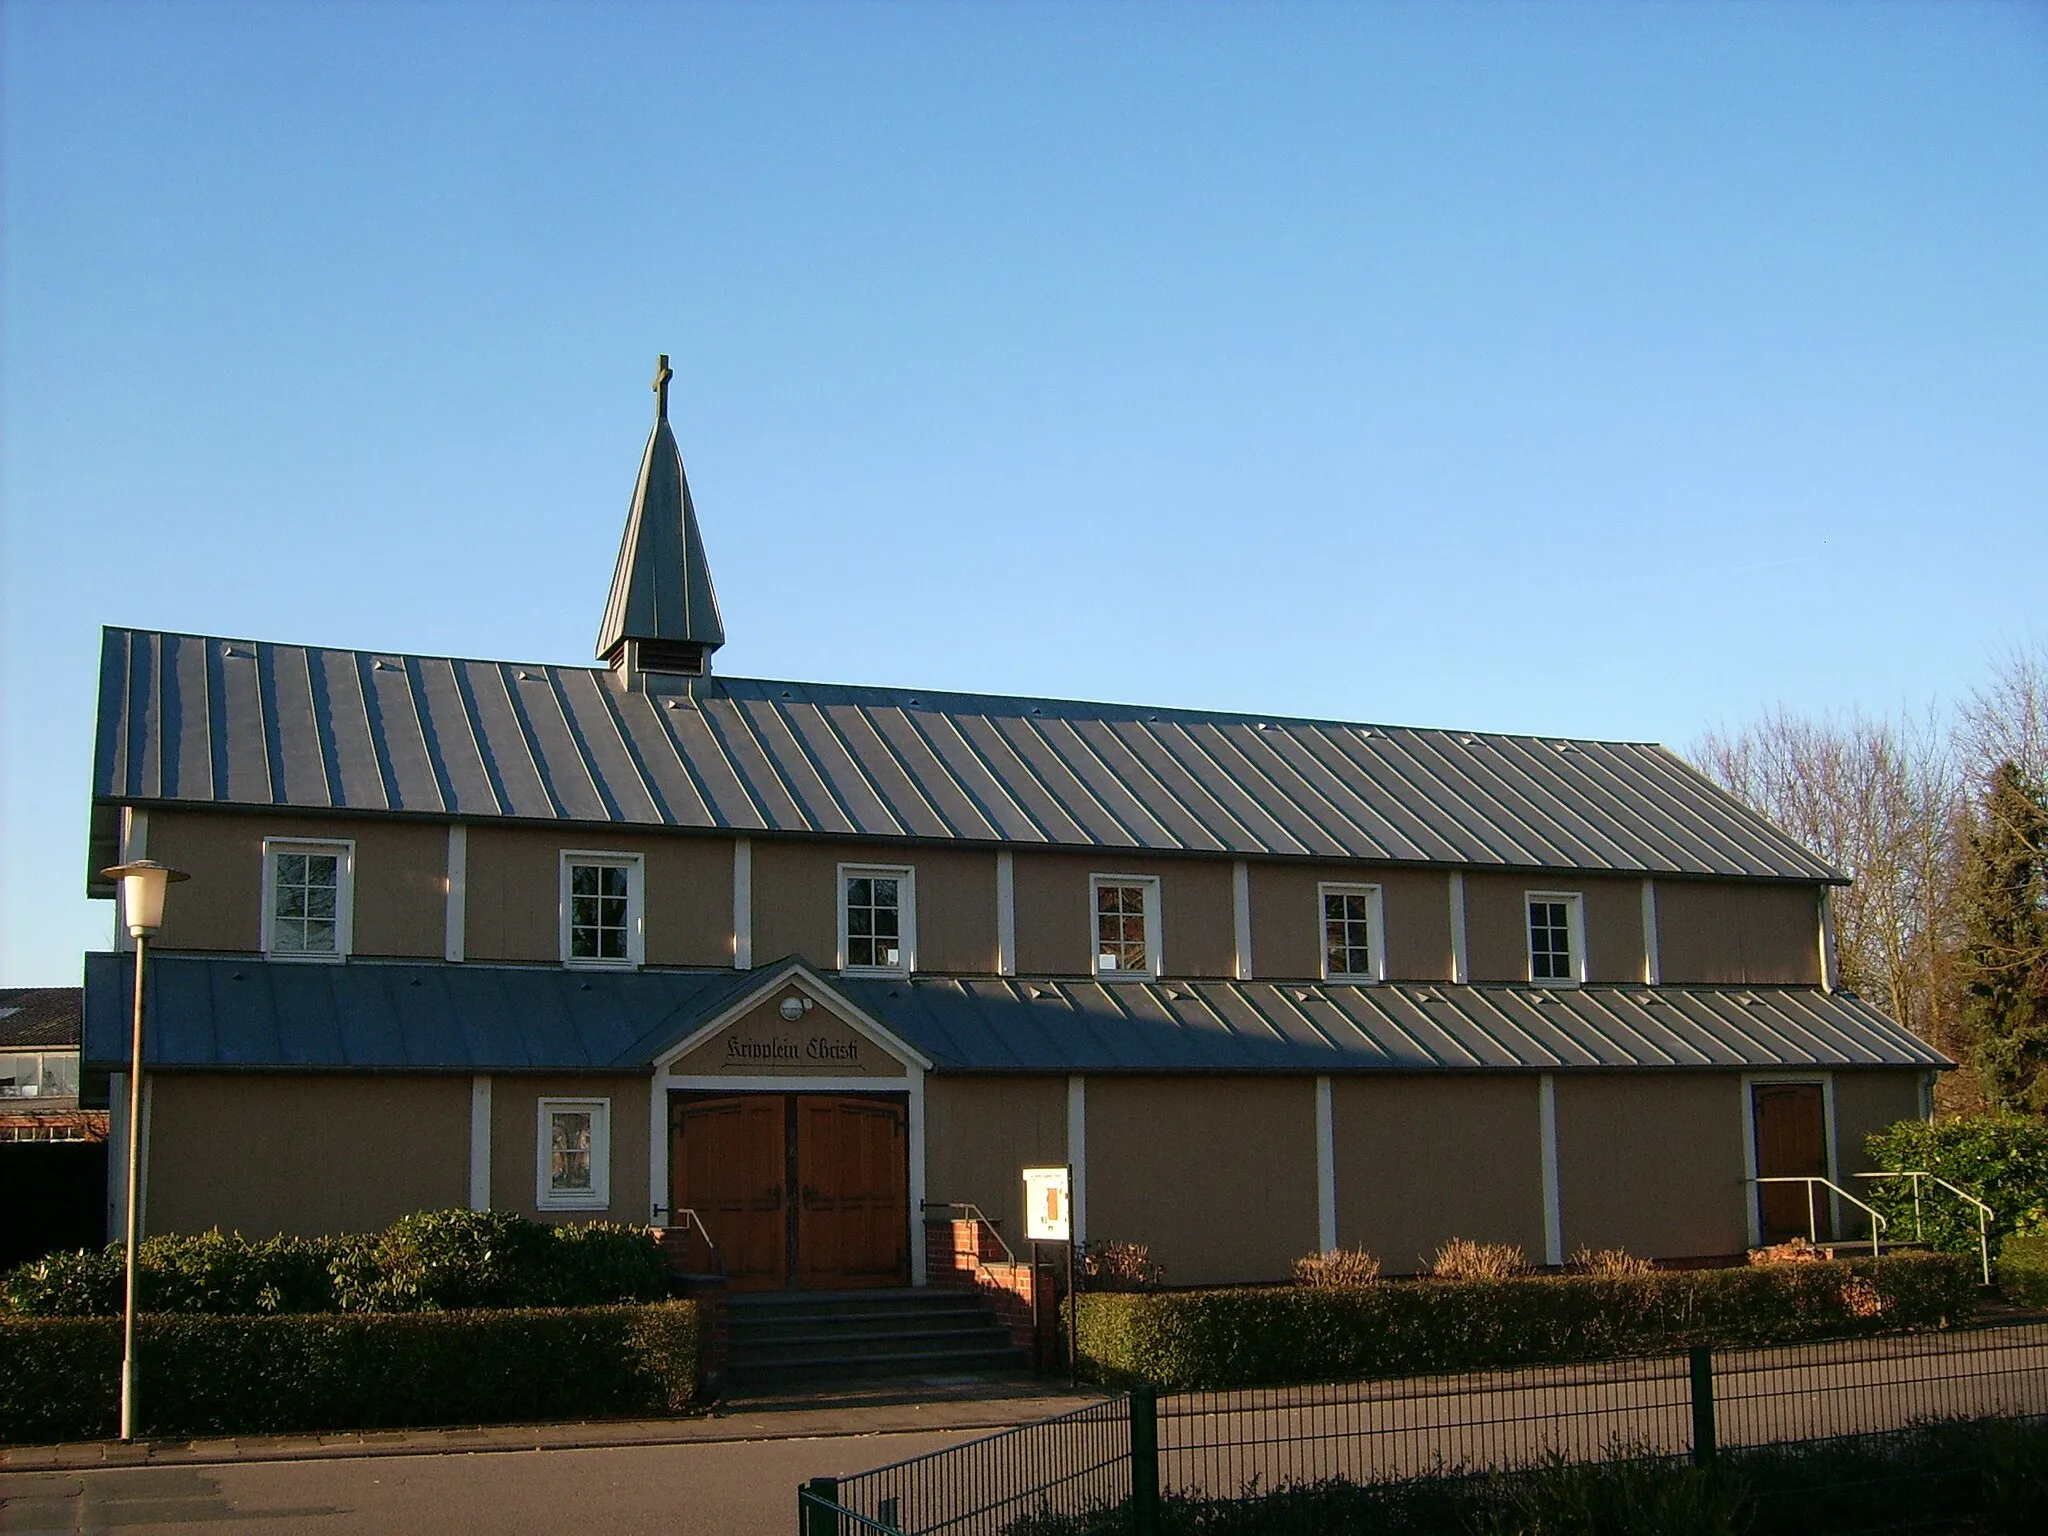 Photo showing: The "Kripplein Christi" is the Lutheran church in Glandorf, Lower-Saxony, Germany. Originally erected in Ahle, a locality of Holsen bear Bünde in Westphalia, the movable church was translocated to Glandorf in 1952.